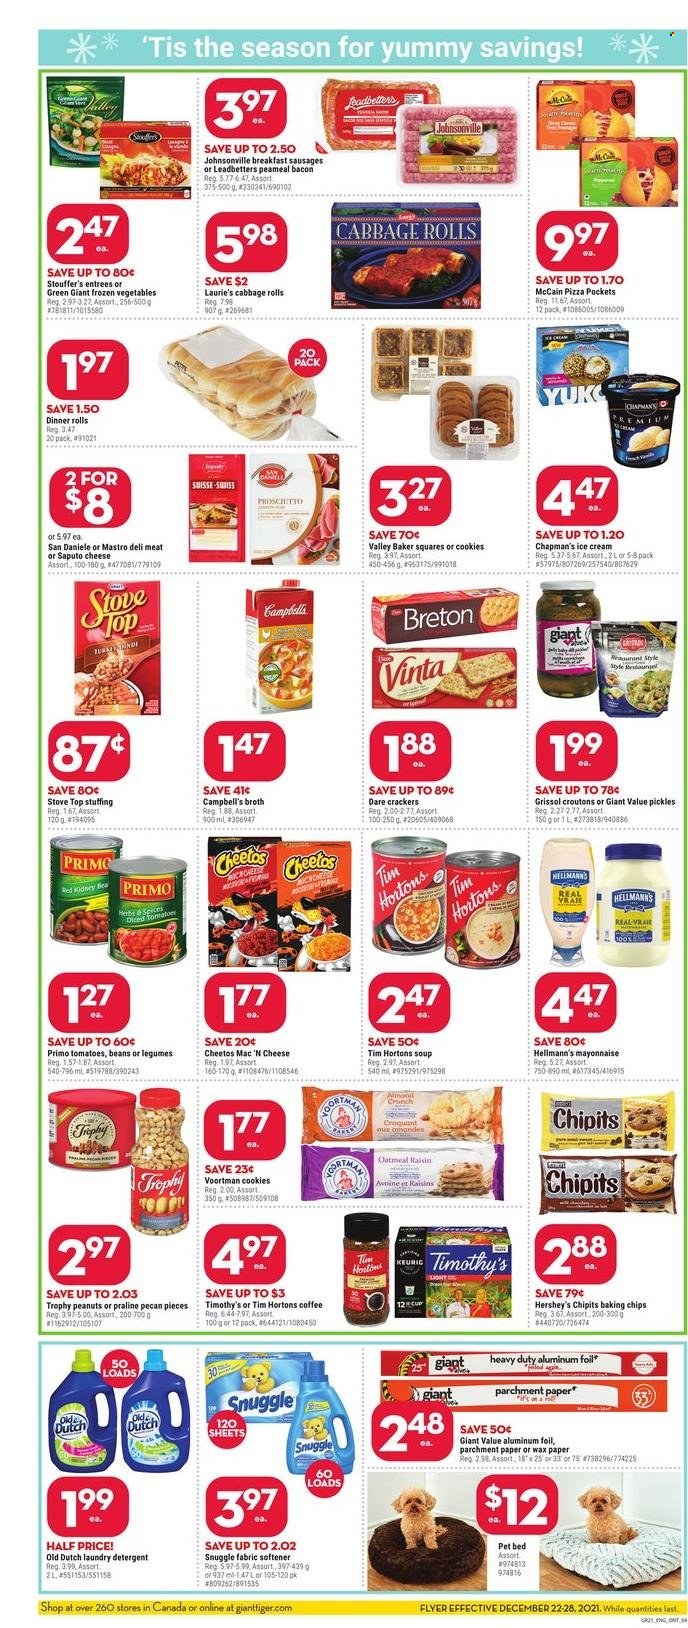 thumbnail - Giant Tiger Flyer - December 22, 2021 - December 28, 2021 - Sales products - dinner rolls, cabbage, Campbell's, pizza, soup, bacon, sausage, mayonnaise, Hellmann’s, ice cream, Hershey's, frozen vegetables, Stouffer's, McCain, cookies, crackers, Cheetos, croutons, broth, baking chips, pickles, peanuts, coffee, L'Or, Keurig, Snuggle, fabric softener, laundry detergent, aluminium foil, paper, pet bed, detergent. Page 3.